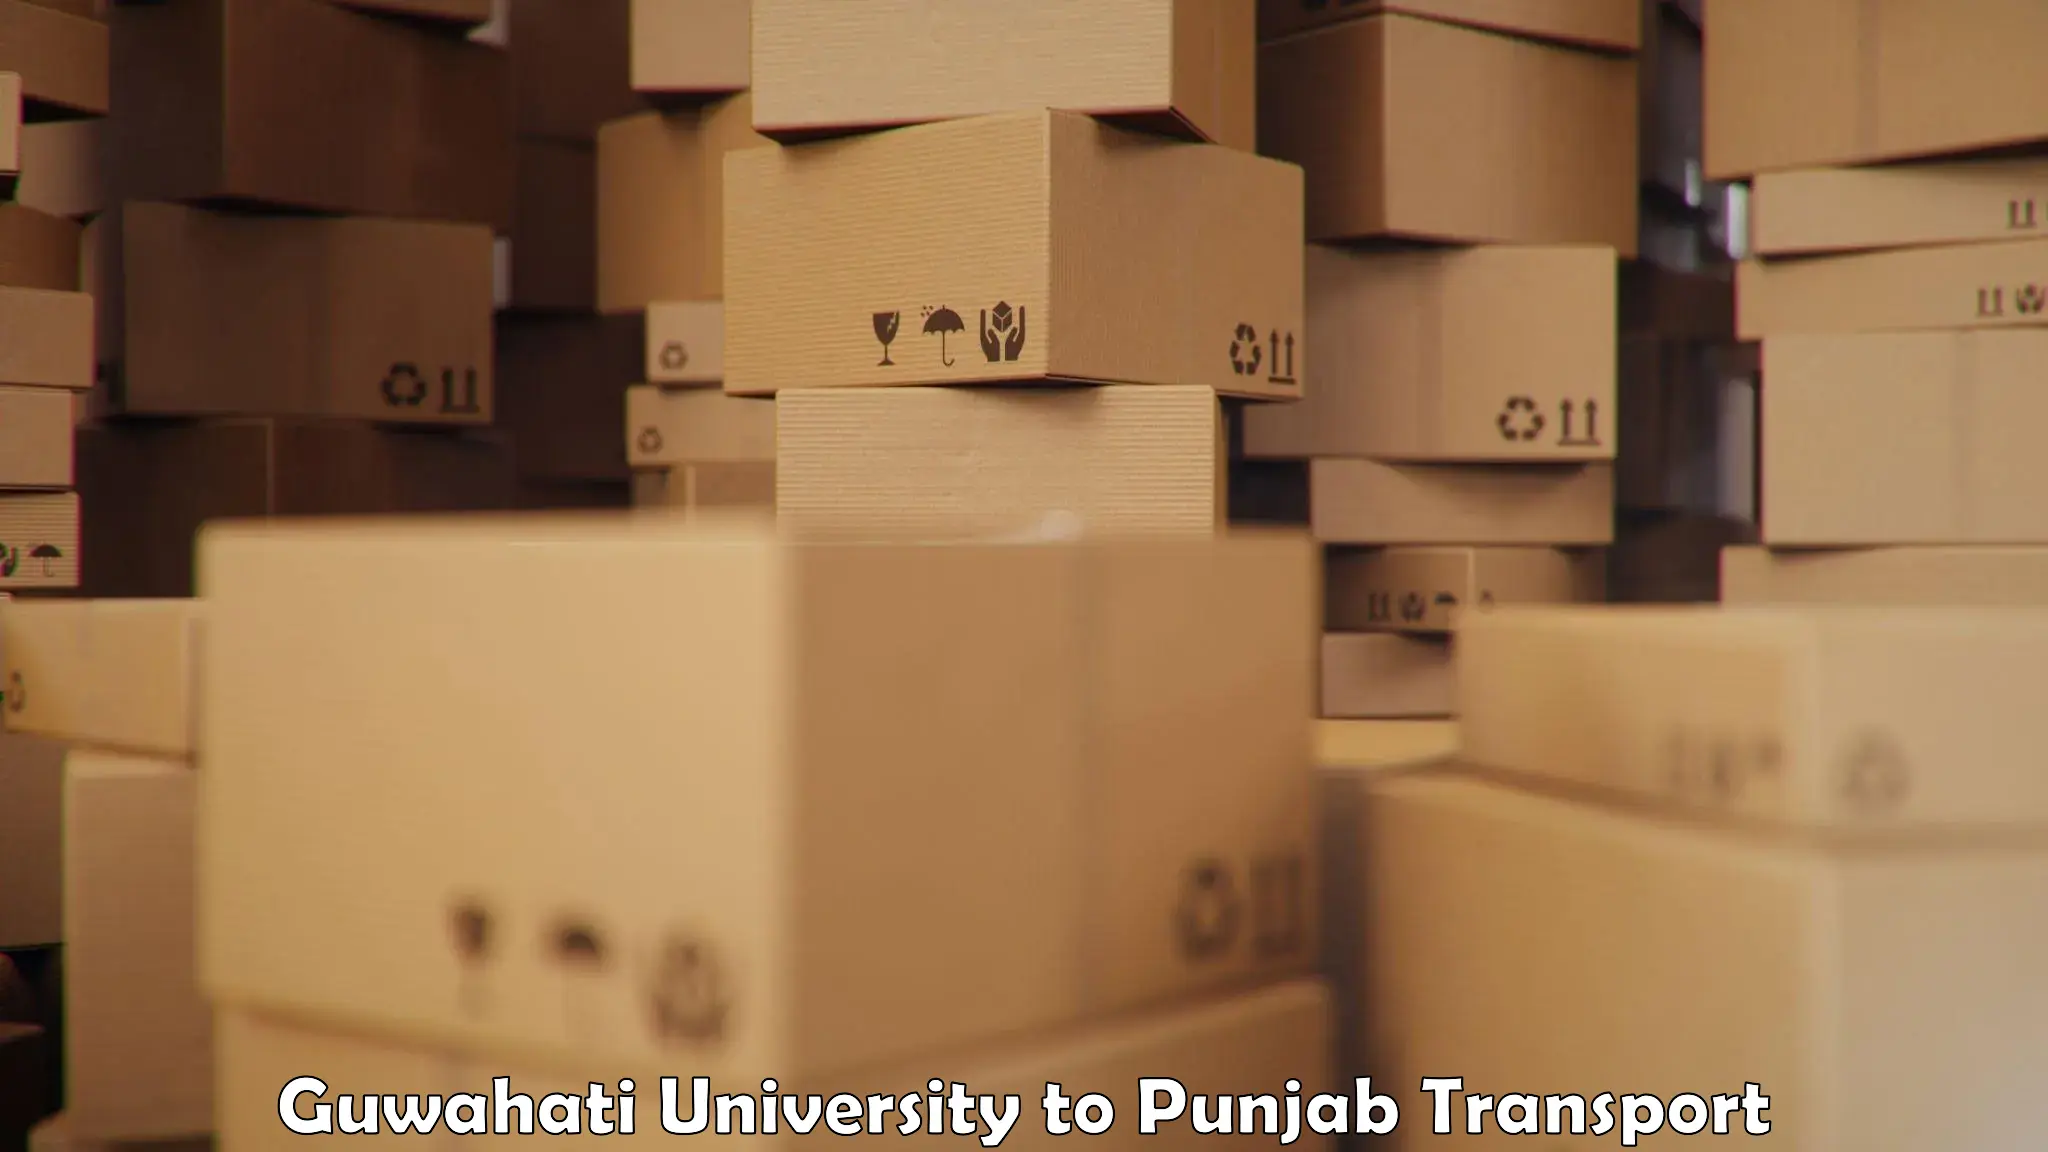 Logistics transportation services Guwahati University to Thapar Institute of Engineering and Technology Patiala